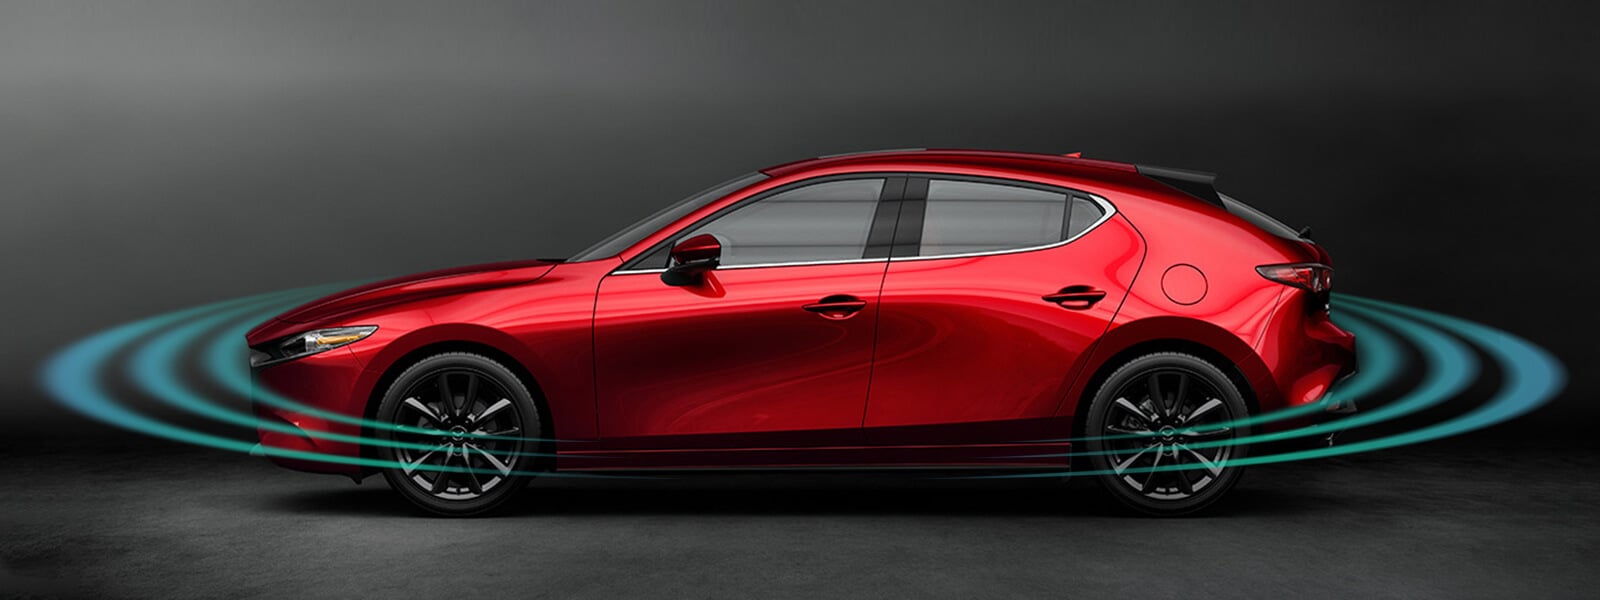 Blurred passenger rear side view of red Mazda3 on highway showing radar pulses radiating outwards from front and back.